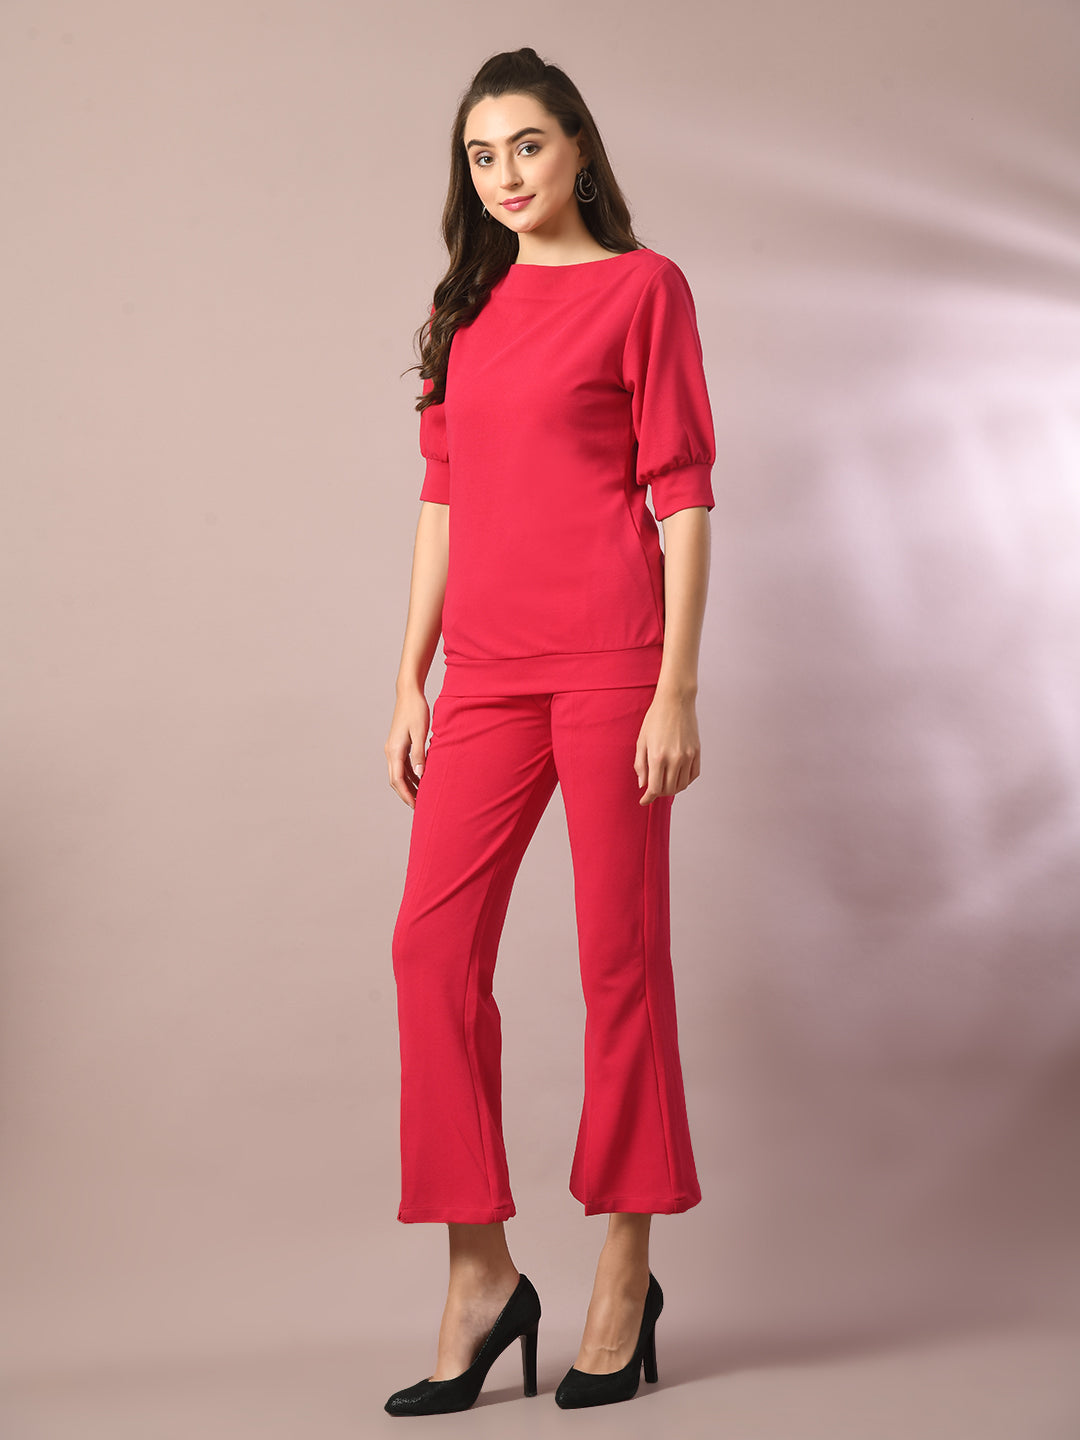 Women's  Pink Solid Boat Neck Party Top With Trousers Co-Ord Set  - Myshka